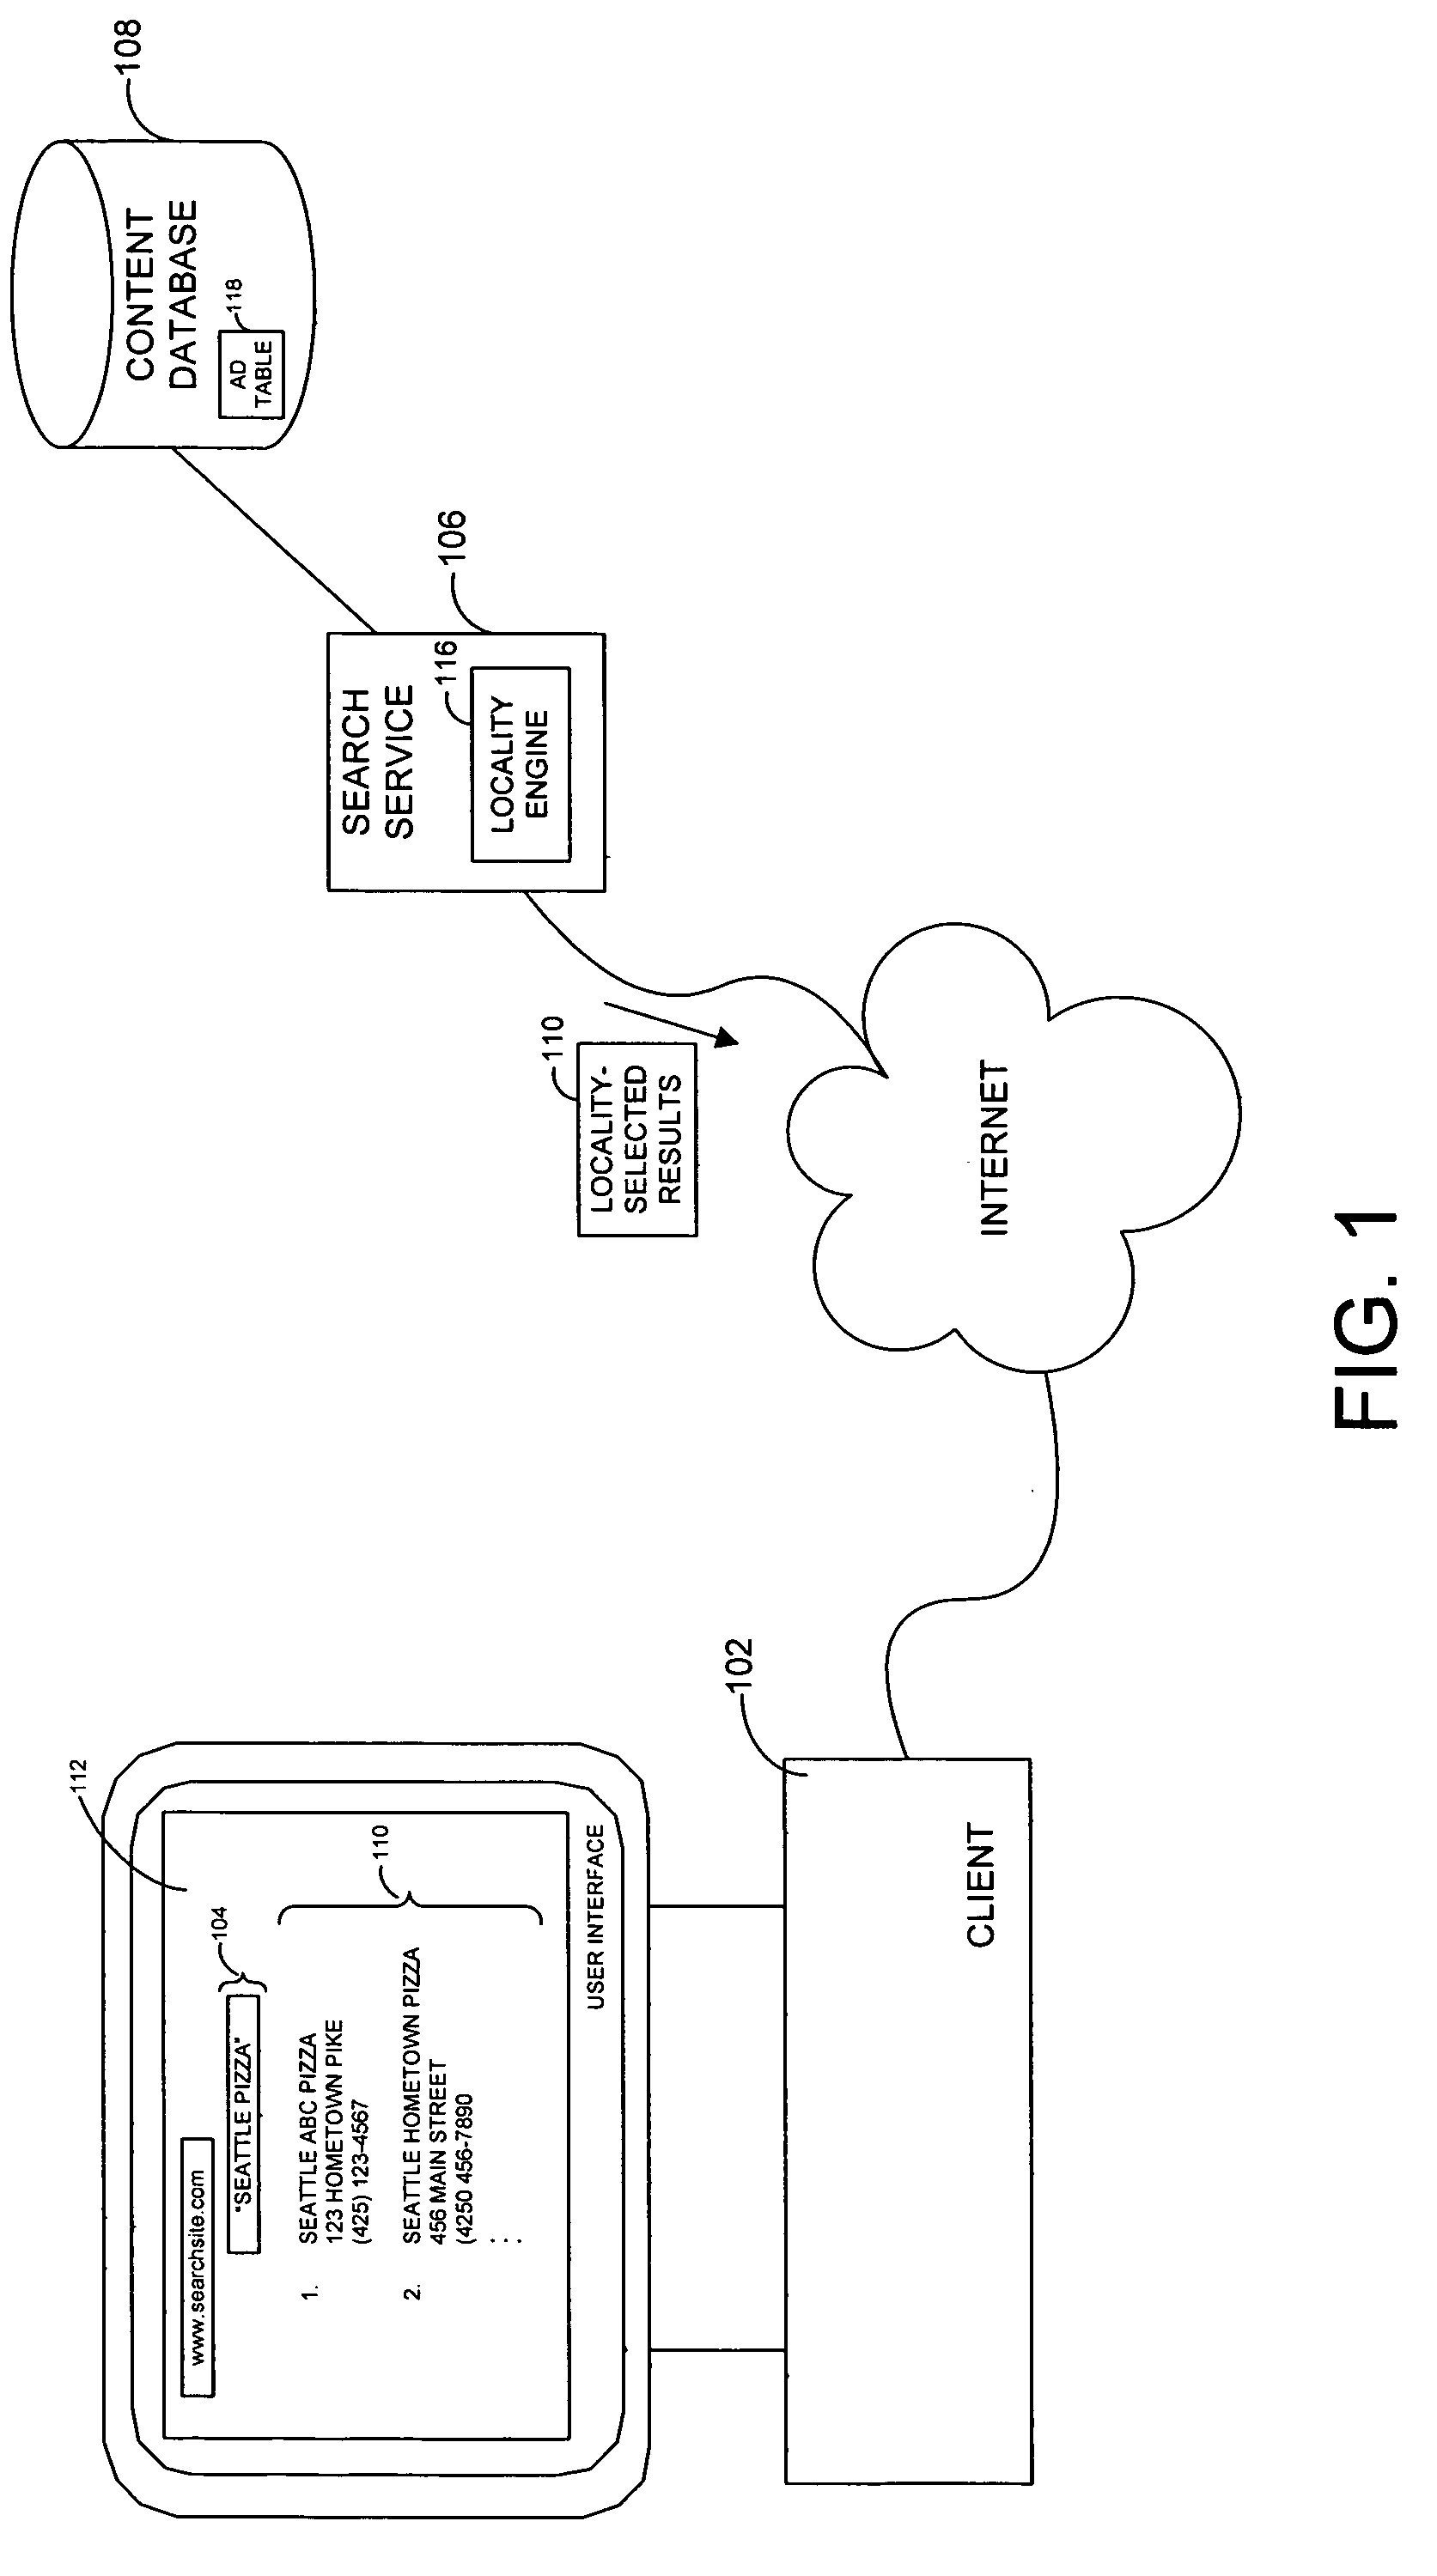 System and method for automatic generation of search results based on local intention